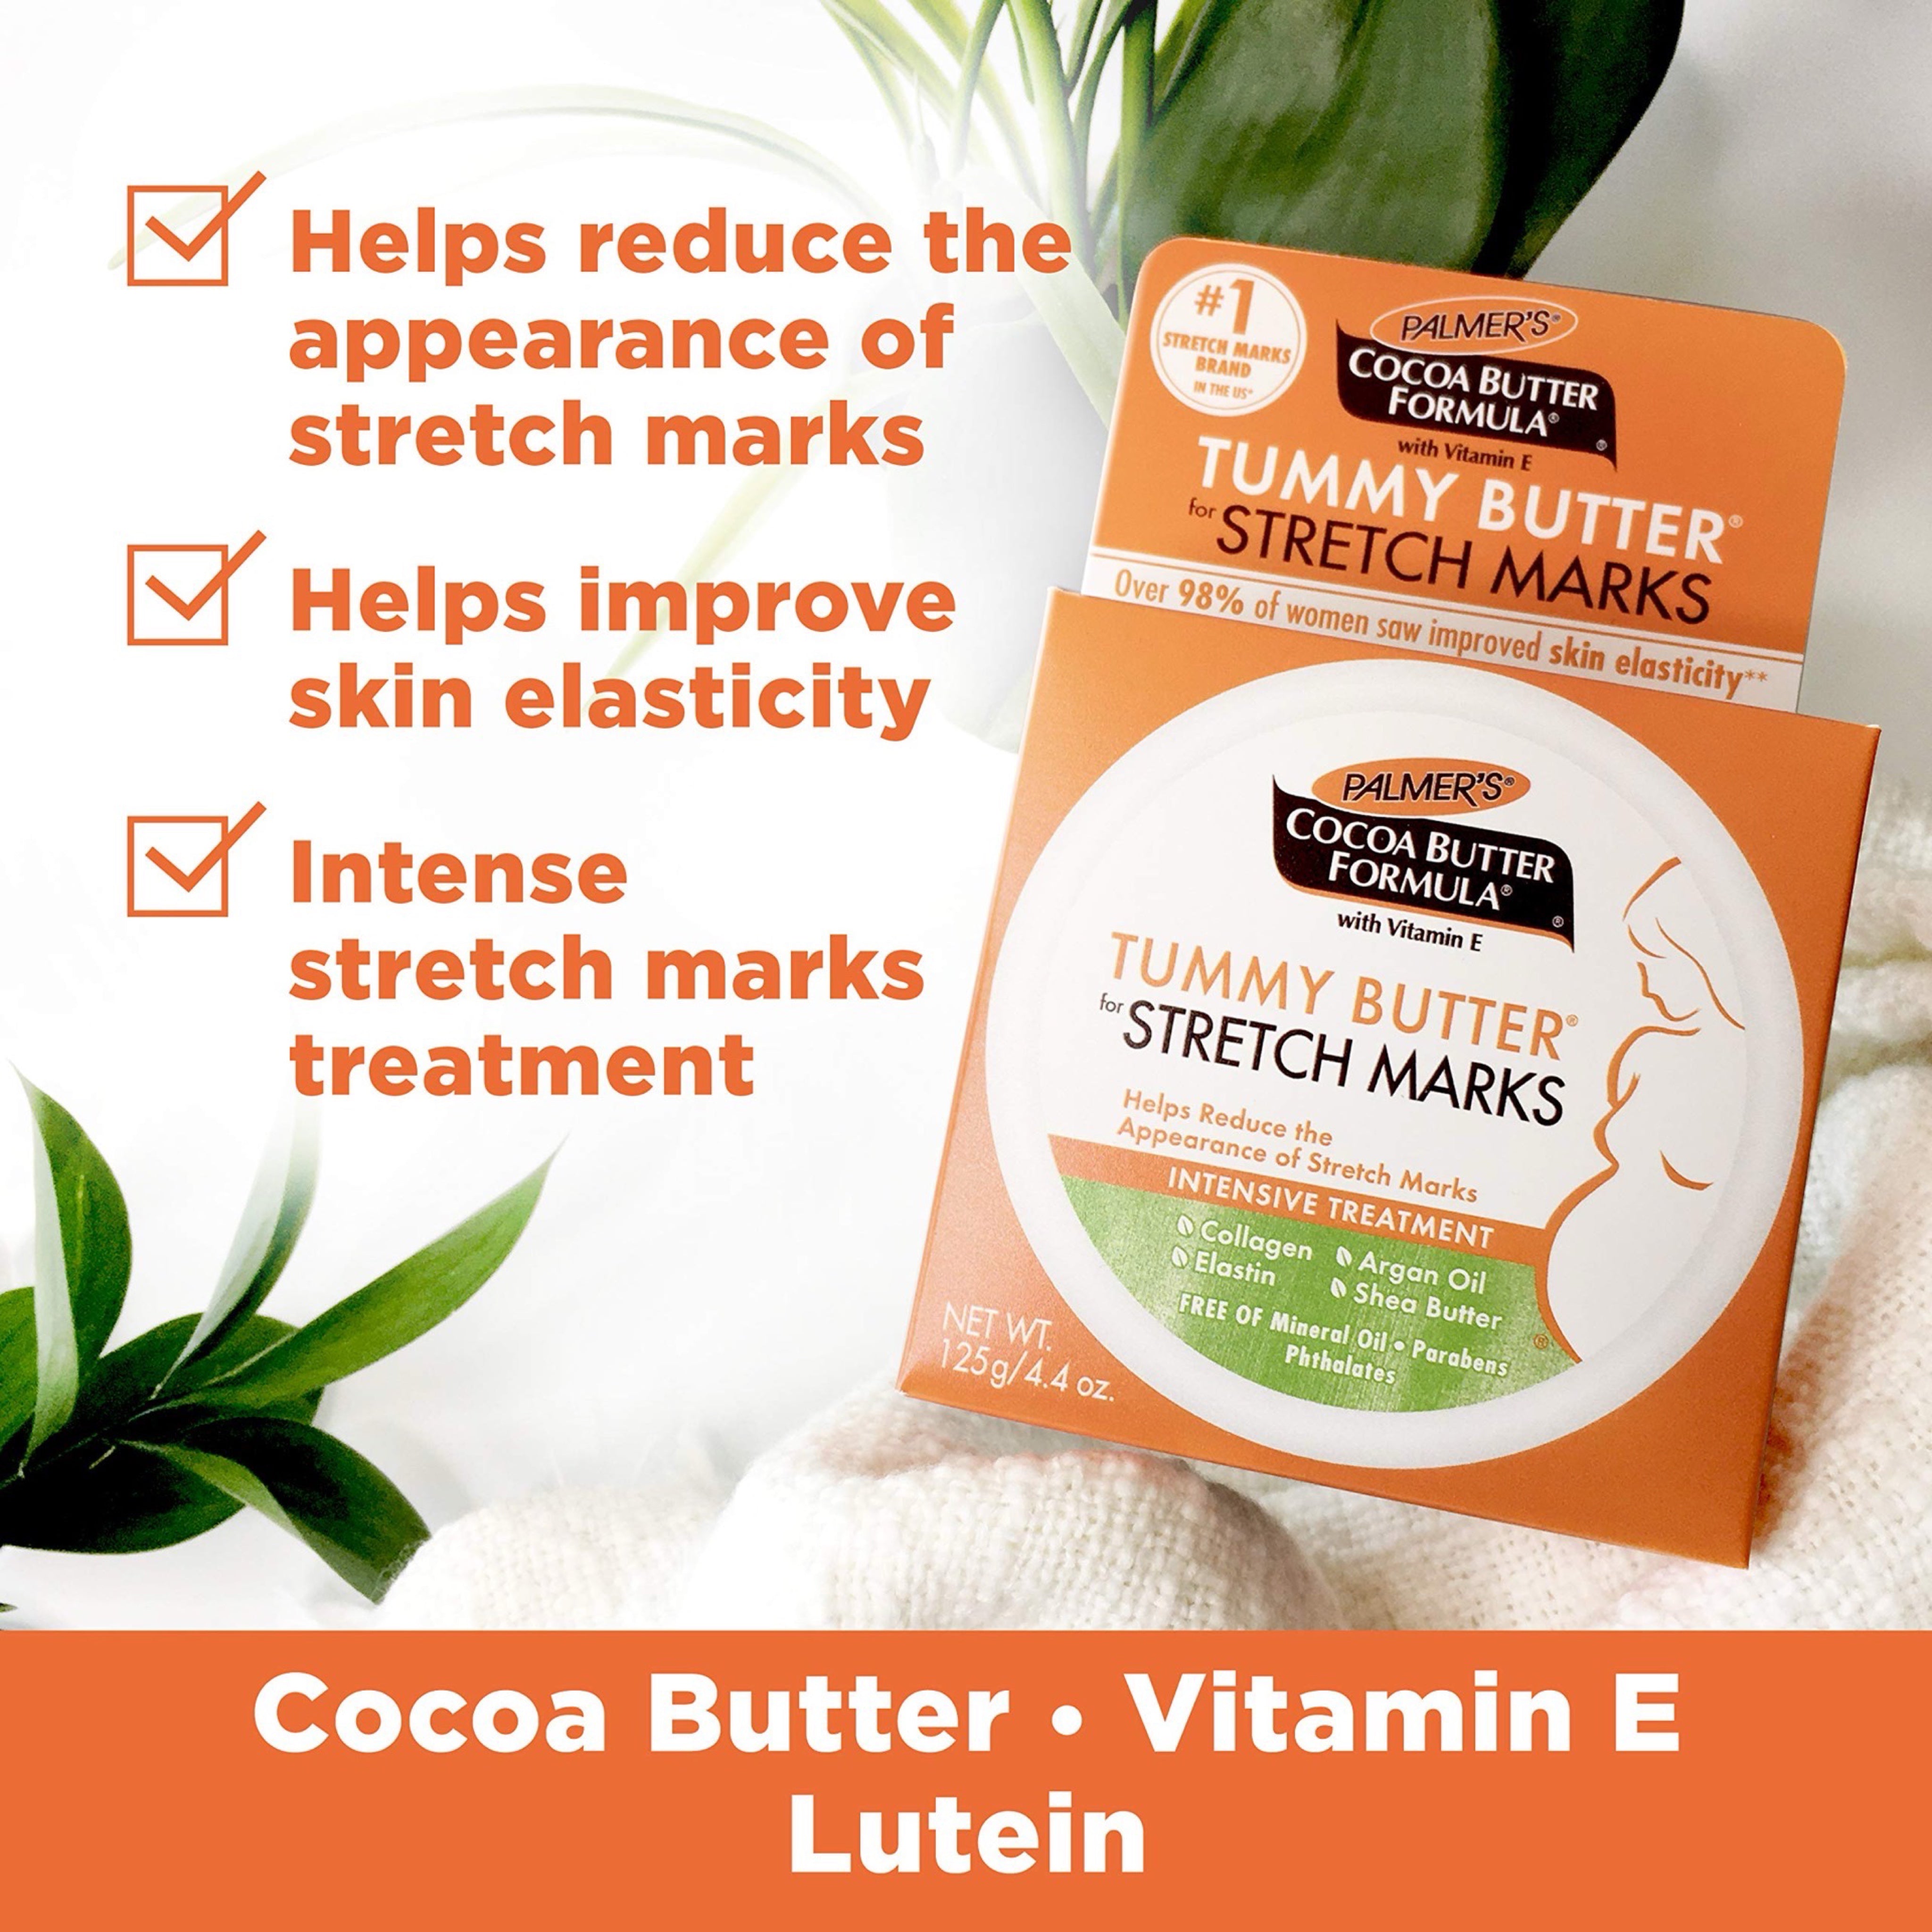 Palmer’s Cocoa Butter Tummy Butter for Pregnancy Stretch Marks